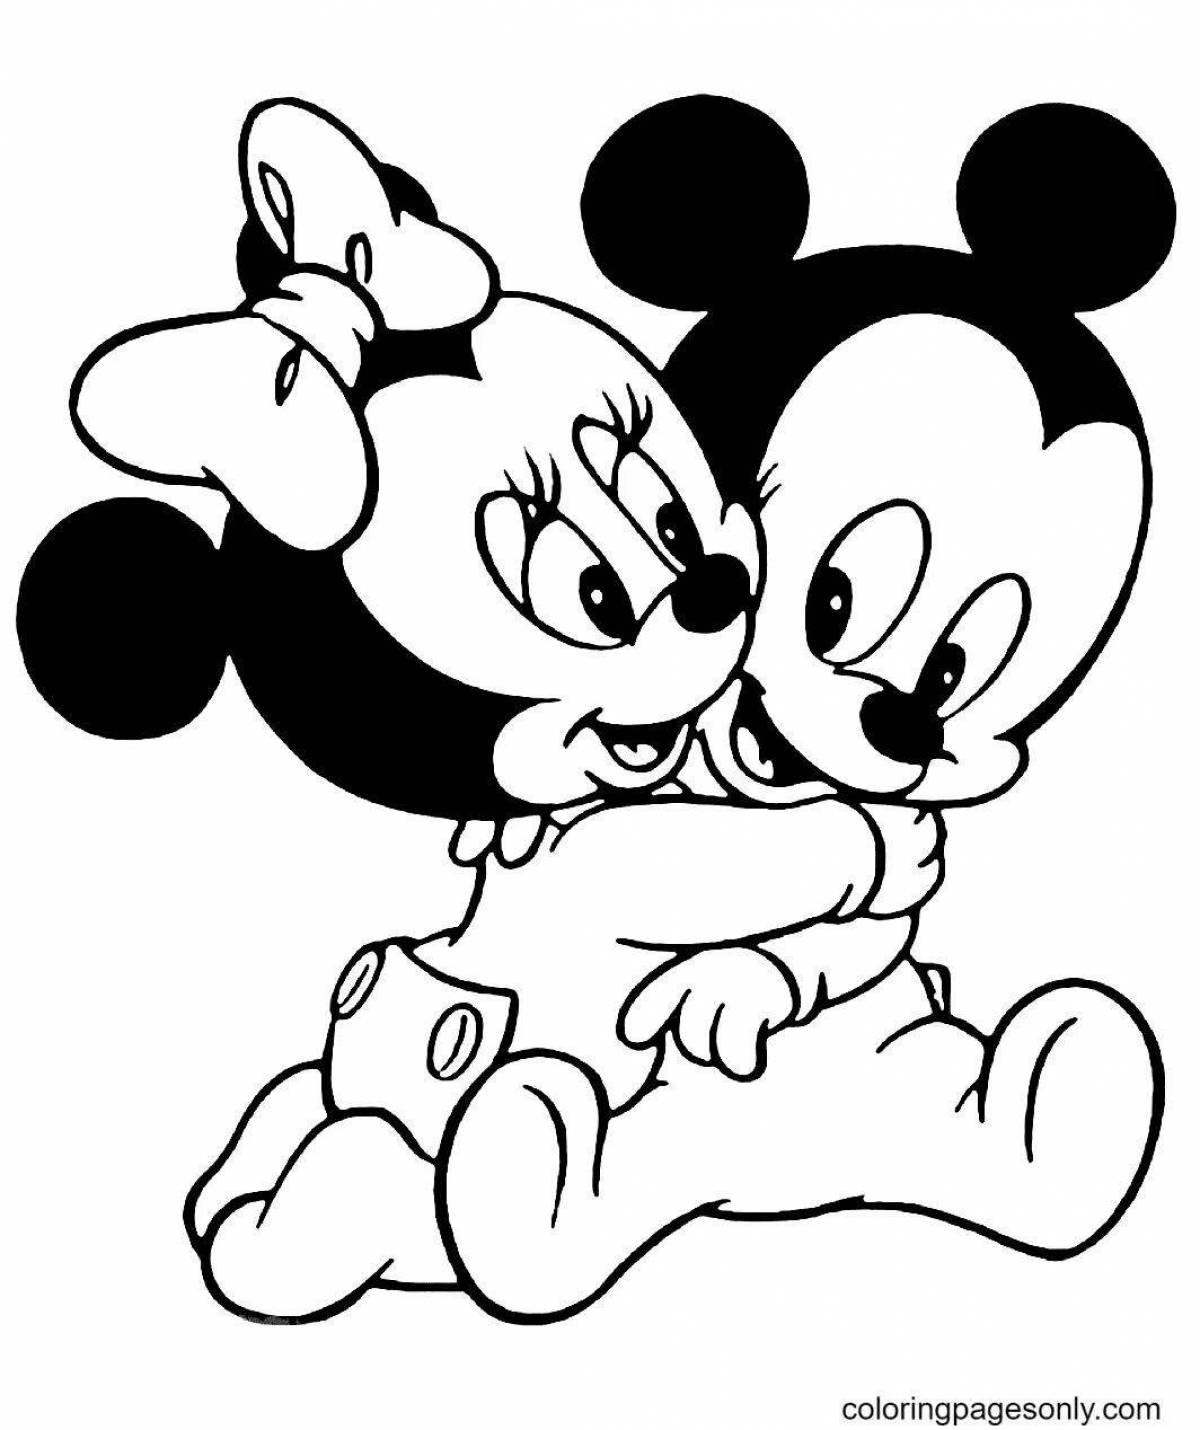 Mickey and mini party coloring book